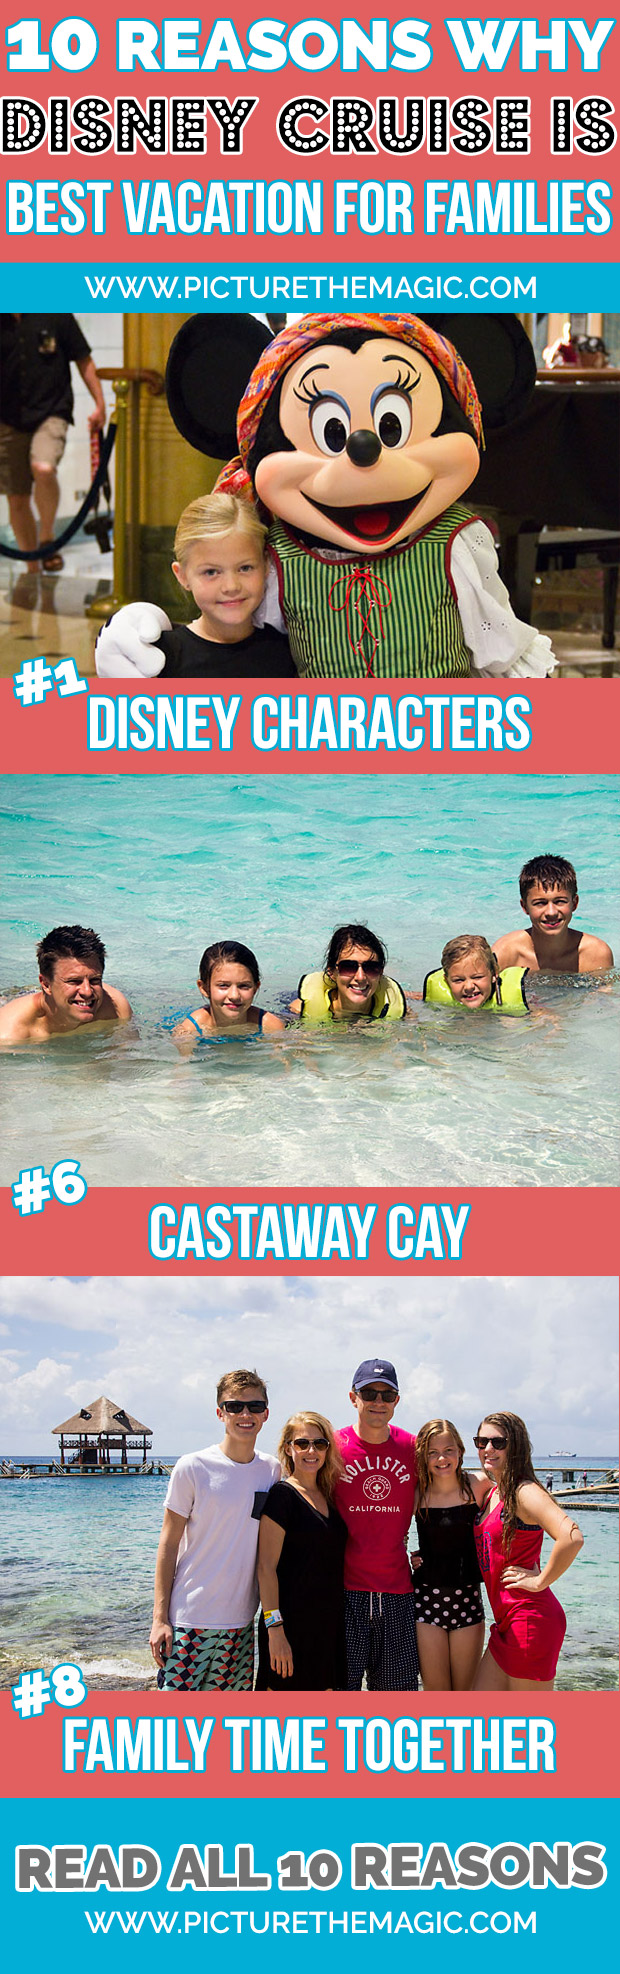 10 Reasons Why Disney Cruise is Best Vacation for Families. Ever.